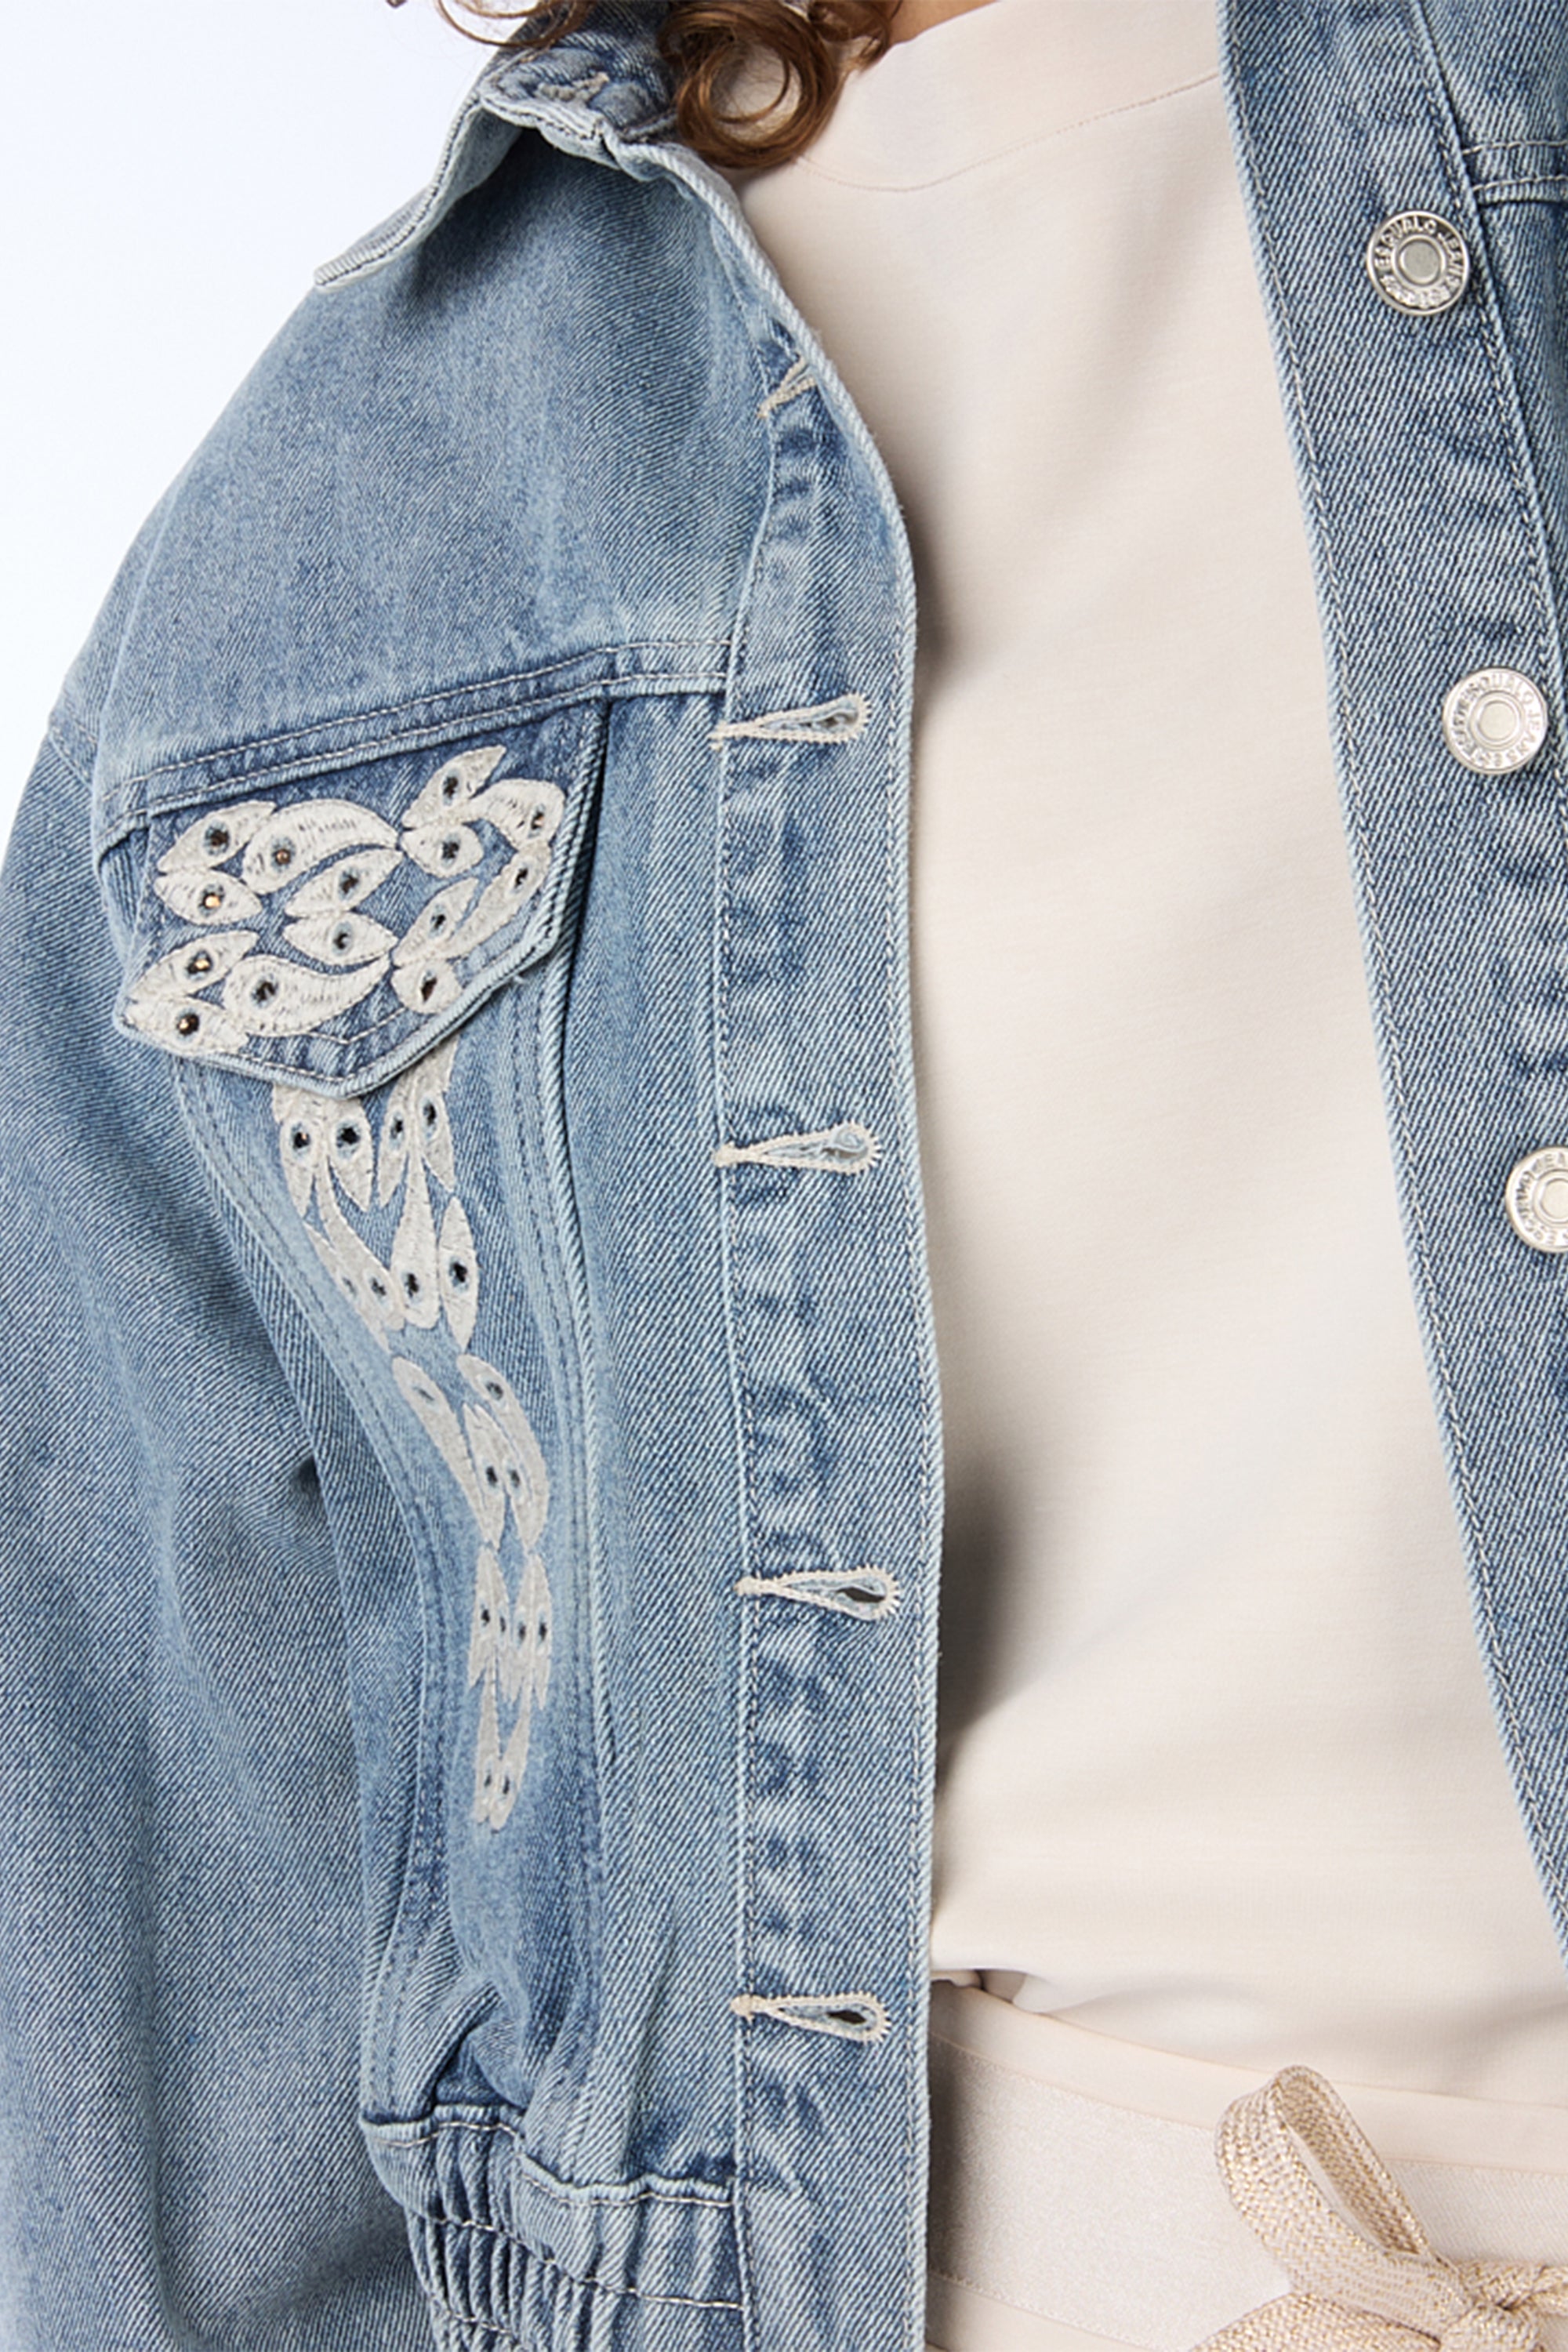 Close up Esqualo (SP2412002) Women's Long Sleeve Cropped Blue Jean Jacket With Embroidery & Rhinestones on Collar and Front Panels